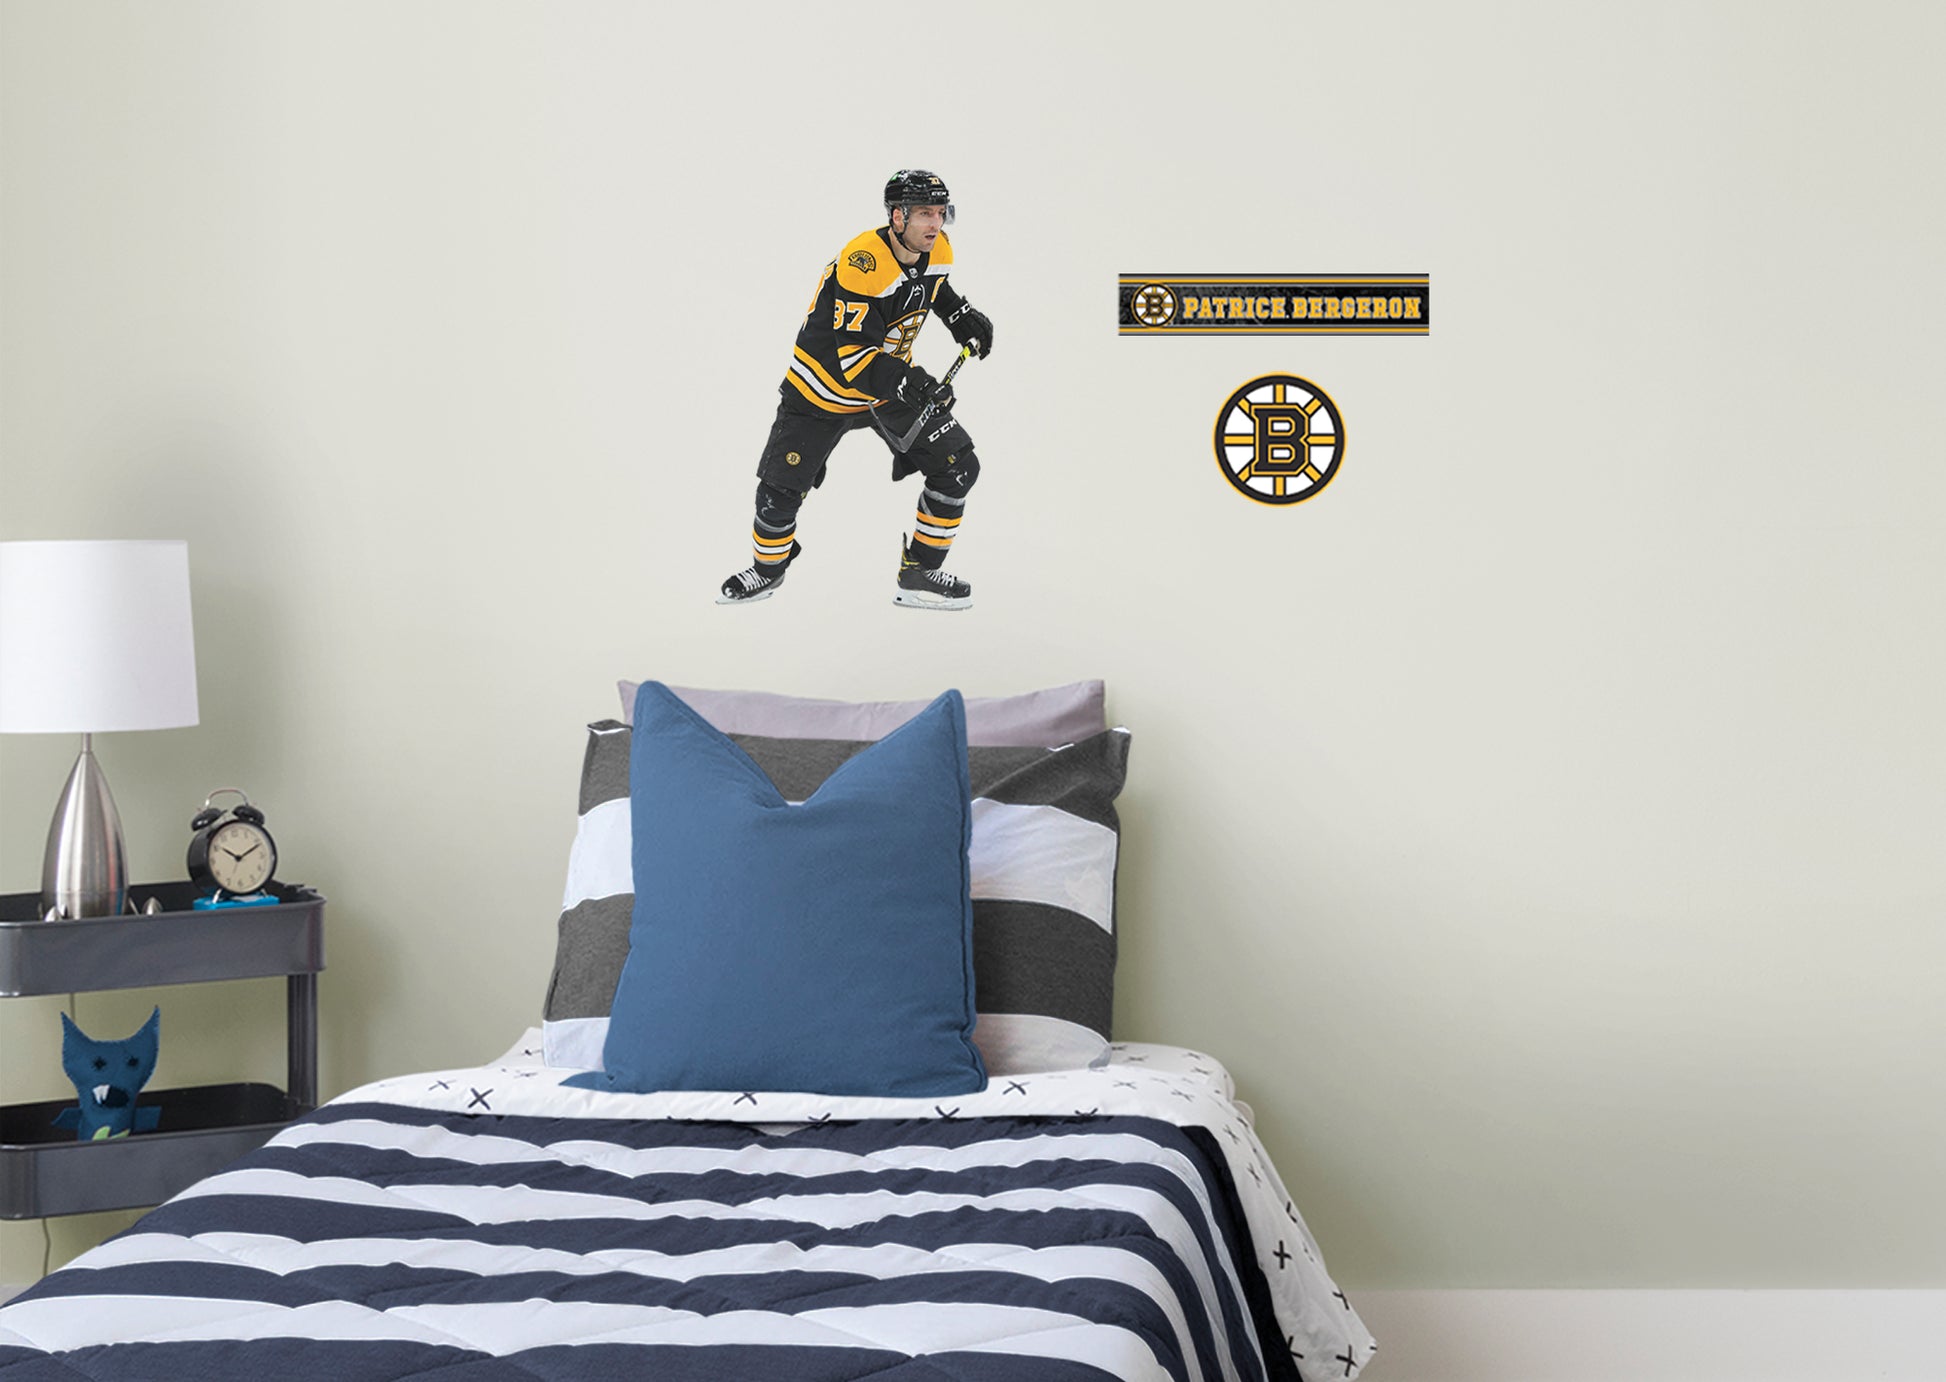 Bergeron Stickers for Sale